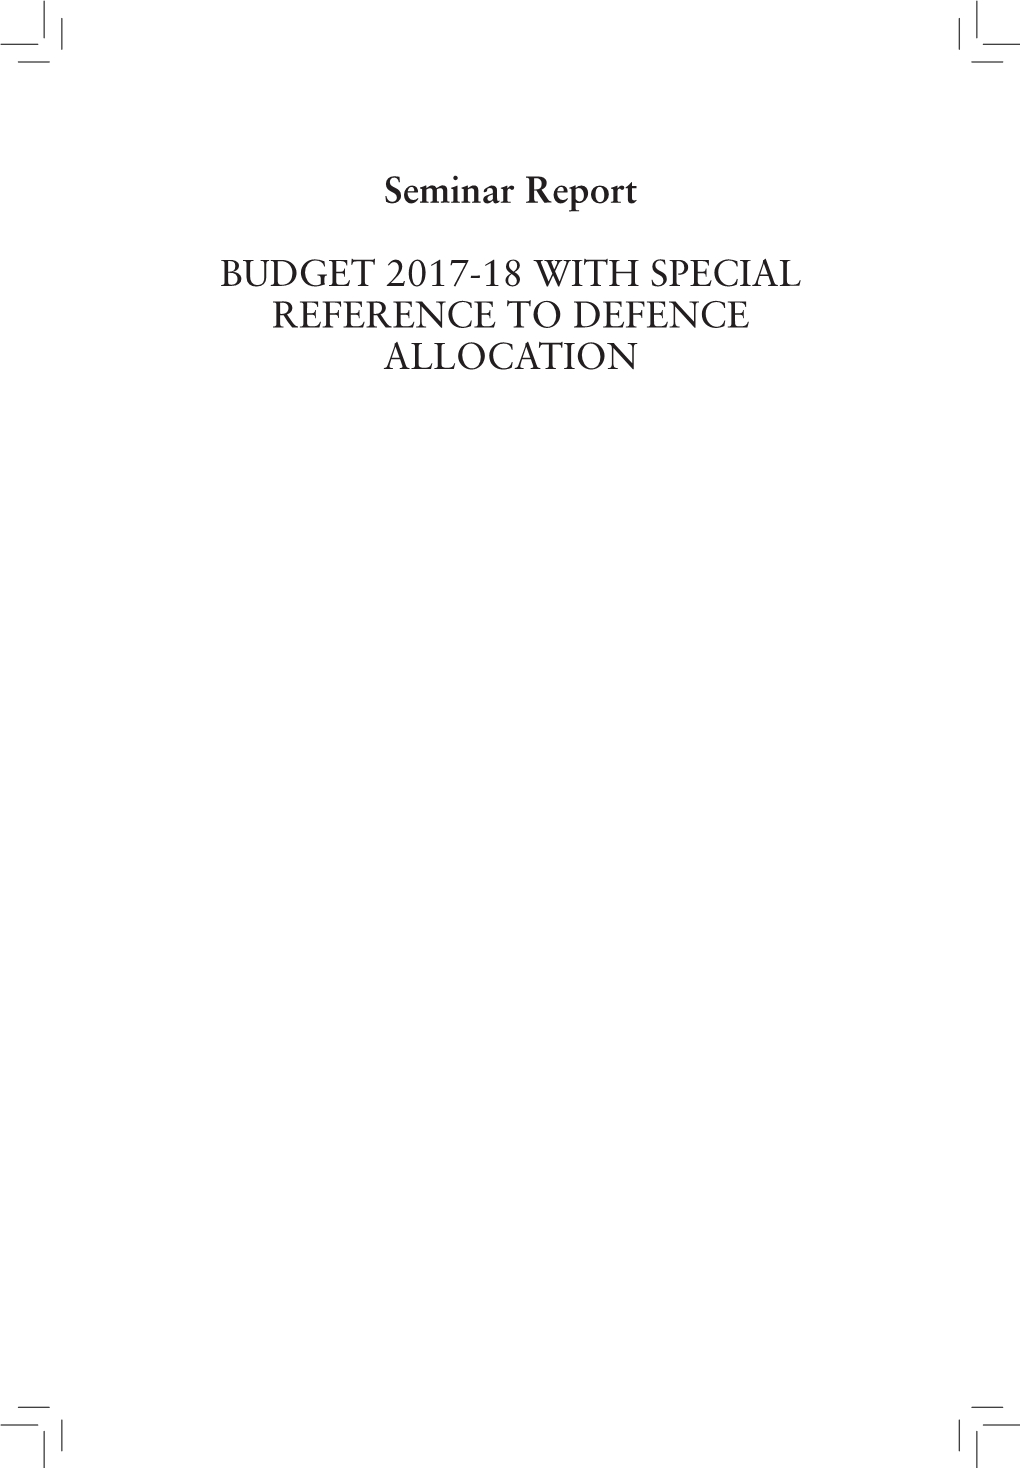 BUDGET 2017-18 with SPECIAL REFERENCE to DEFENCE ALLOCATION Seminar Coordinator: Col Debashish Bose